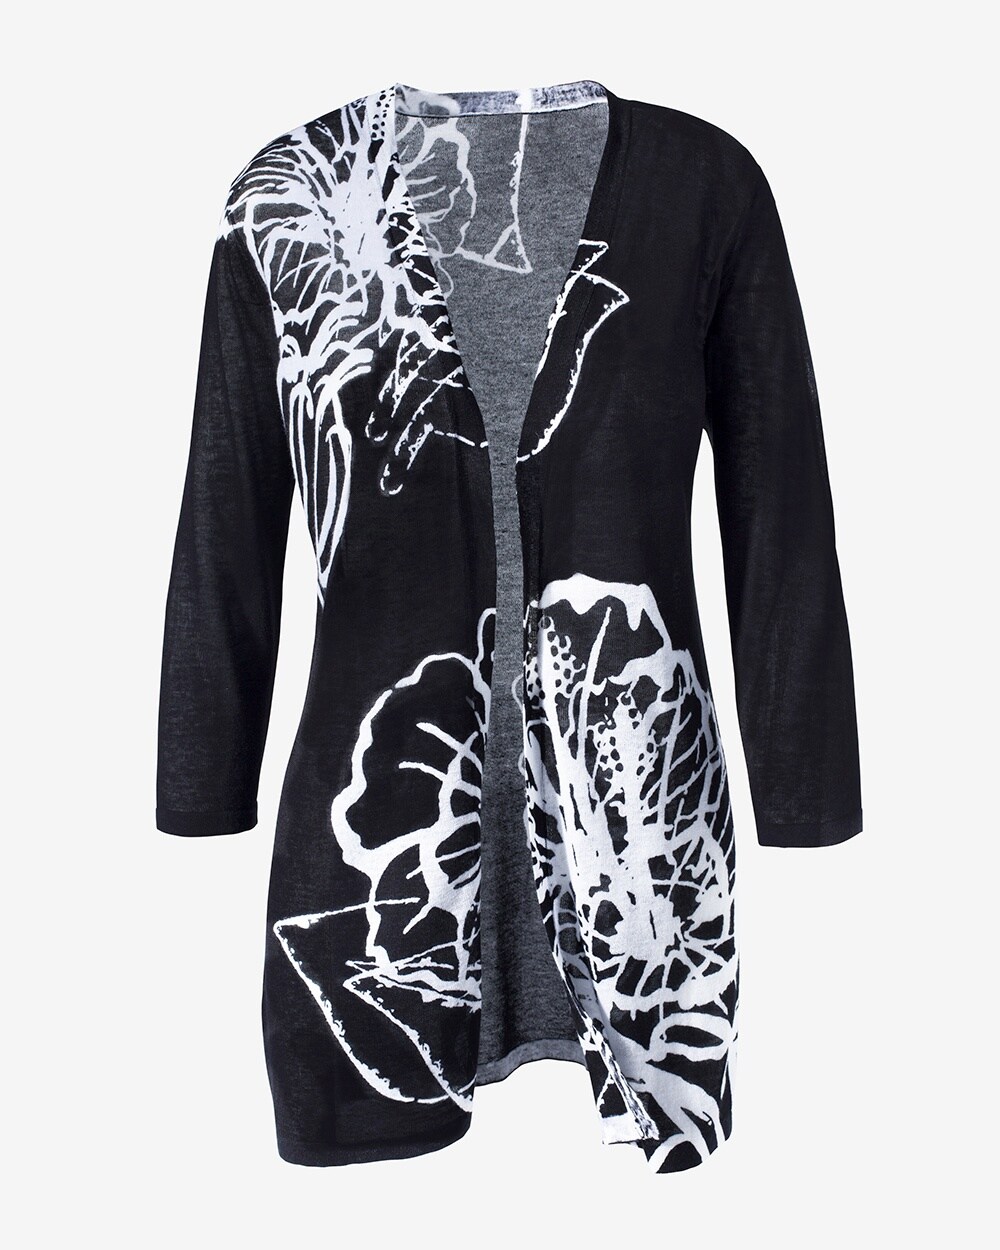 Easywear Abstract Flowers Open-Front Cardigan